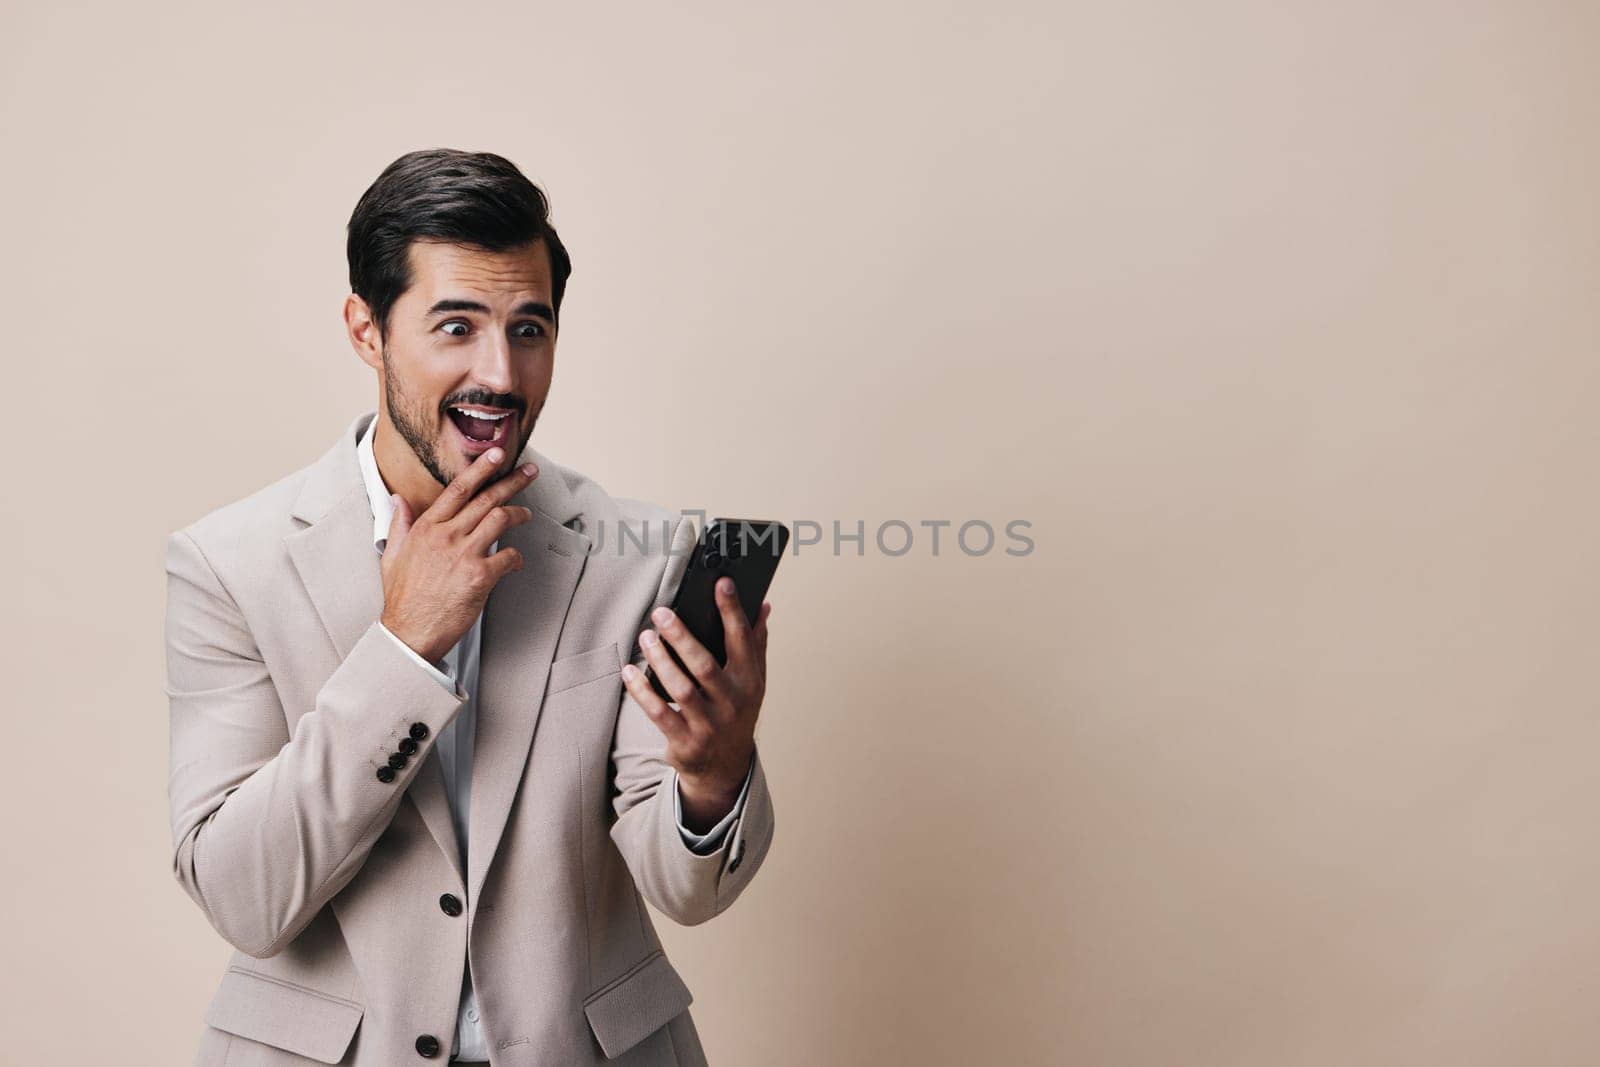 man communication happy suit gray lifestyle technology call beard phone smartphone cellphone young hold beige smile portrait white business guy confident